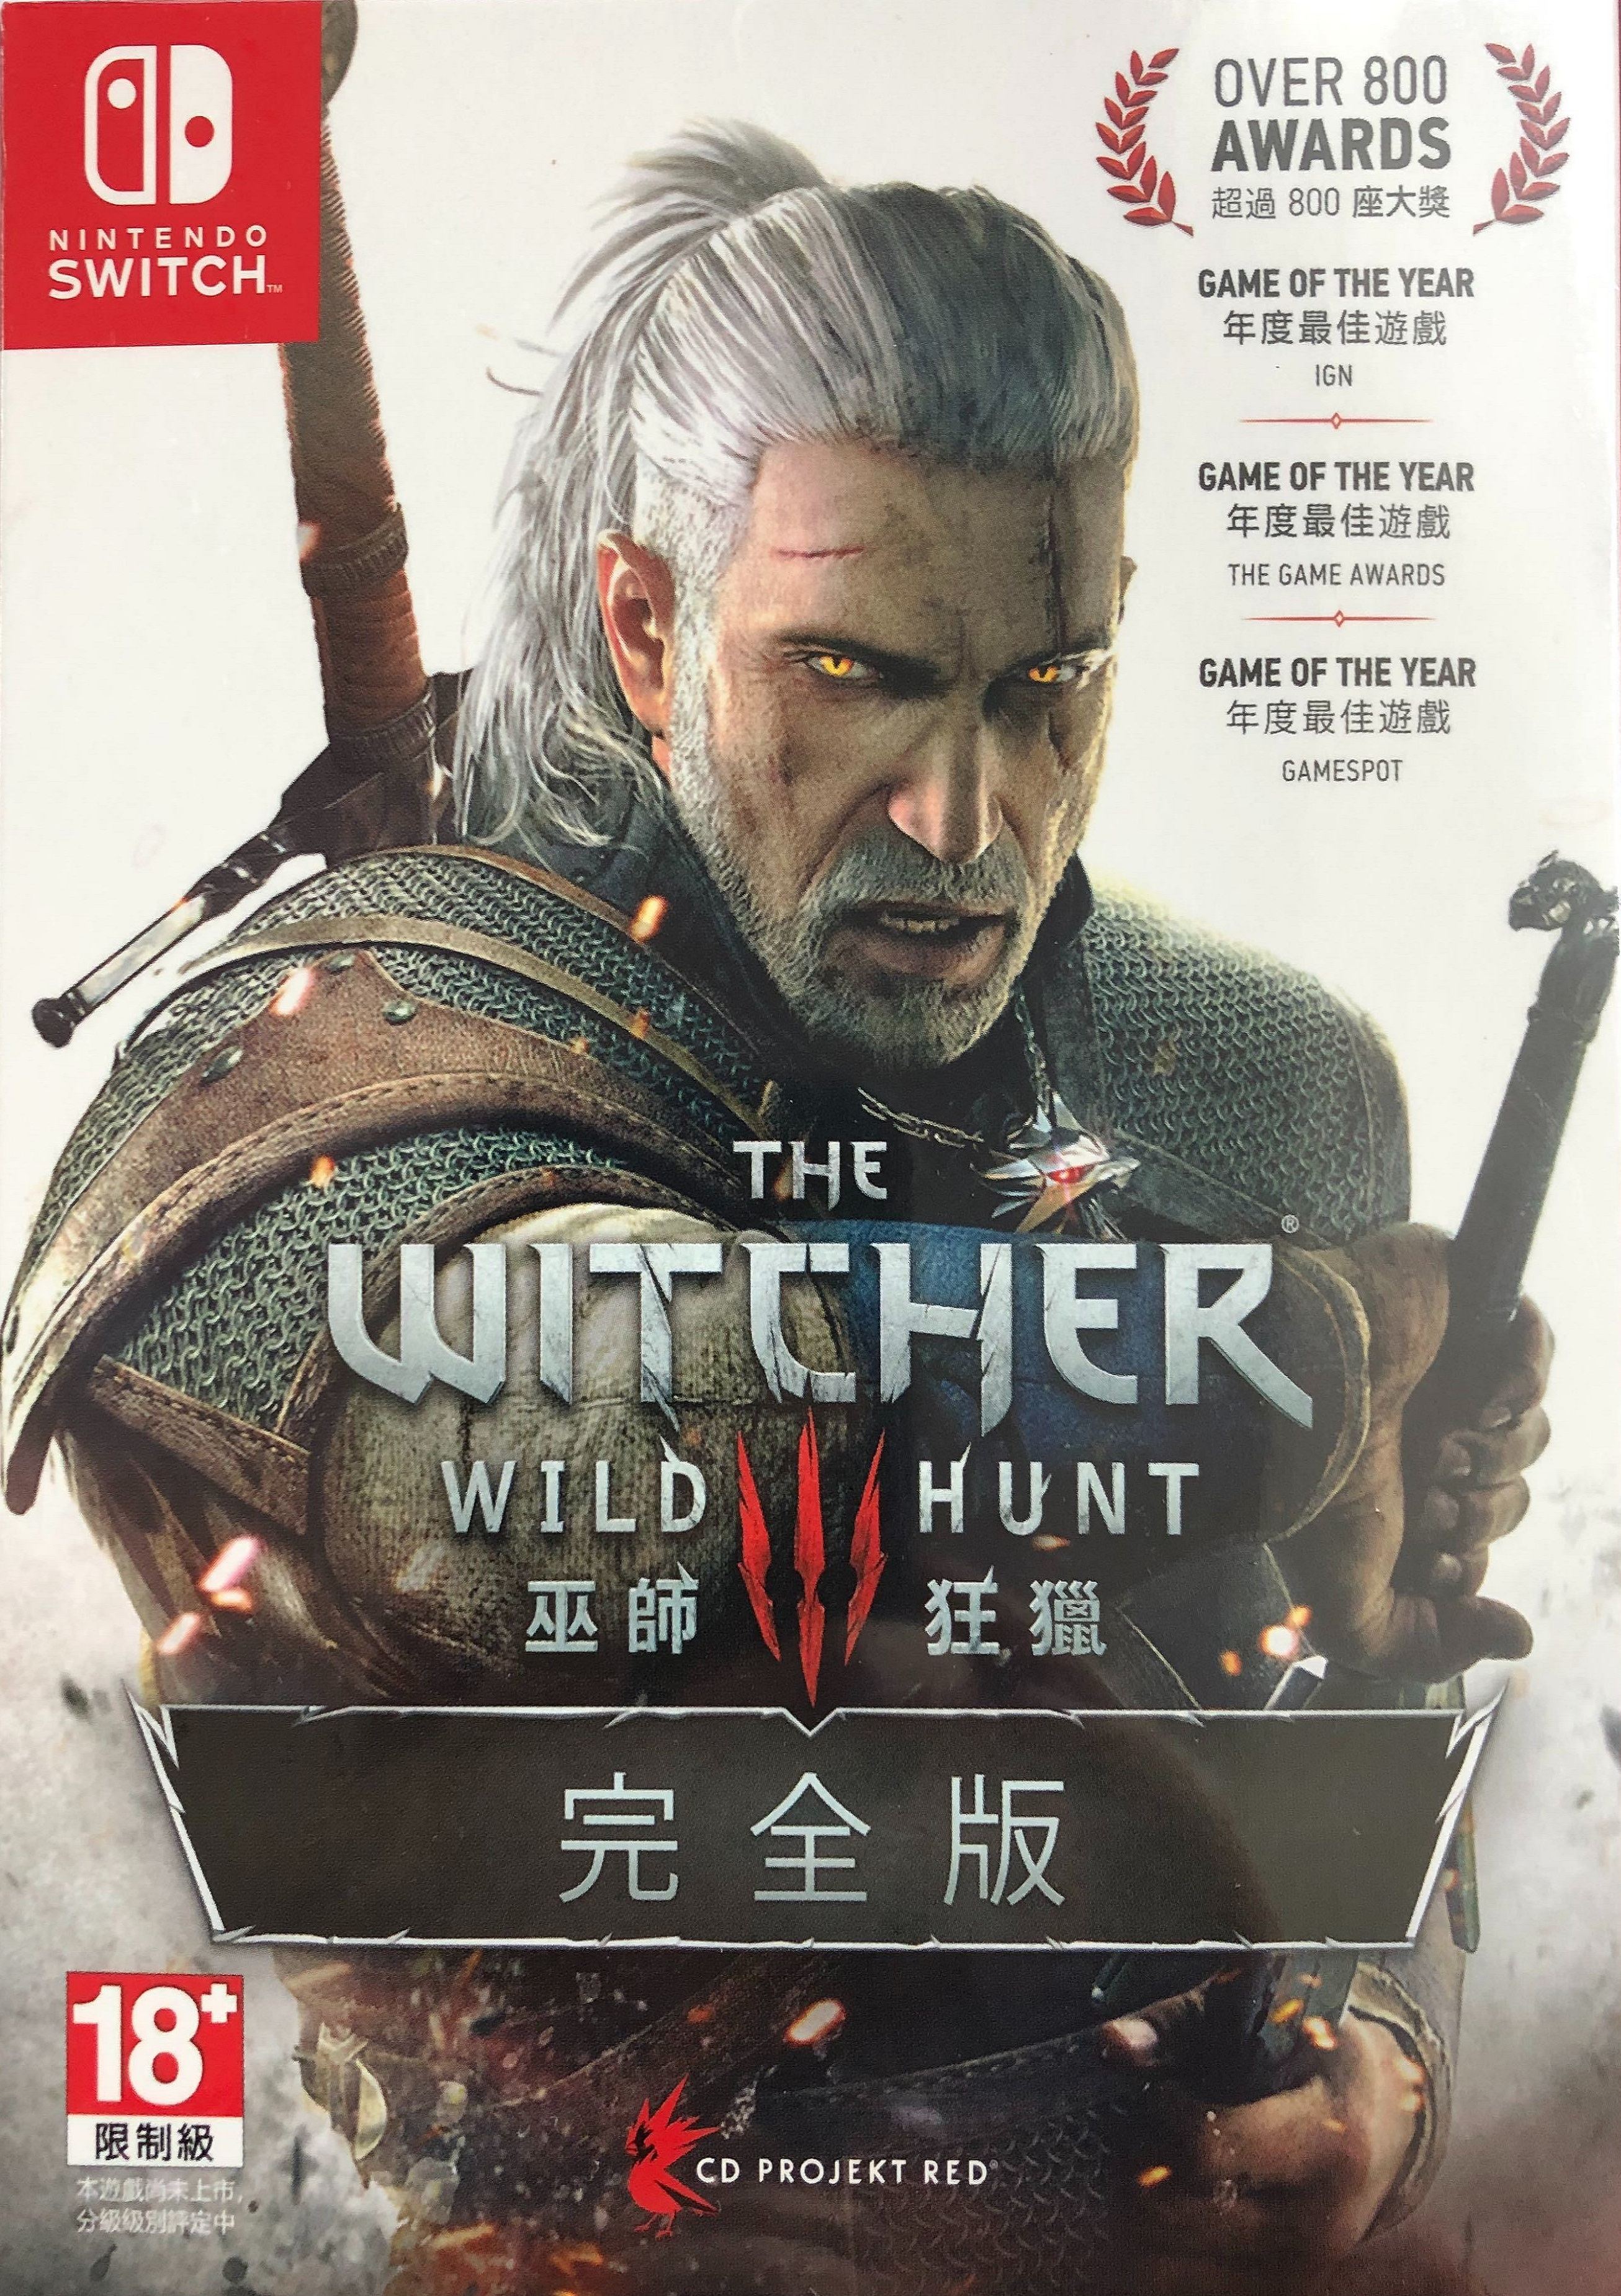 the witcher wild hunt complete edition switch